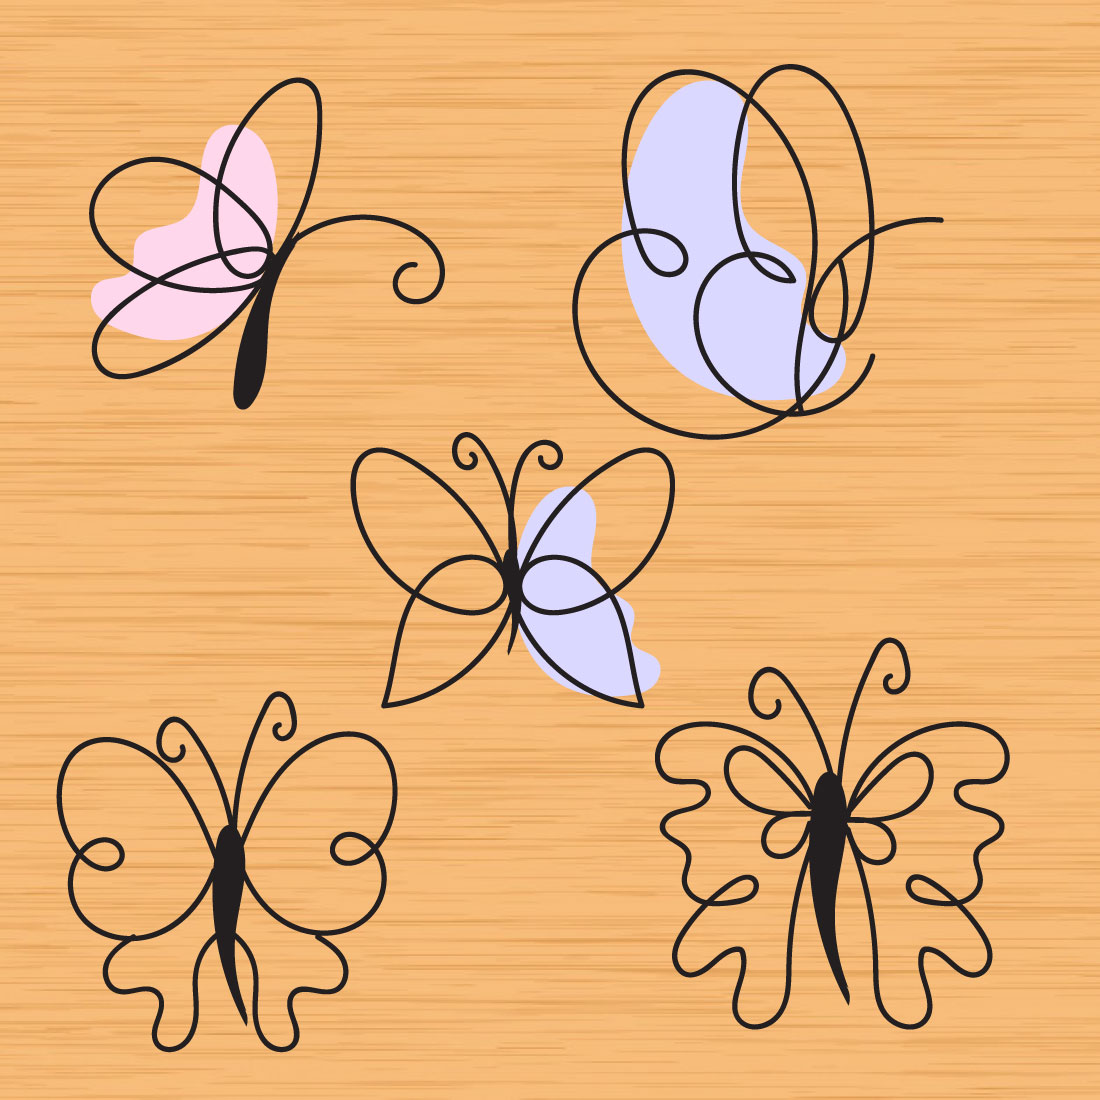 Wooden surface with four butterflies on it.